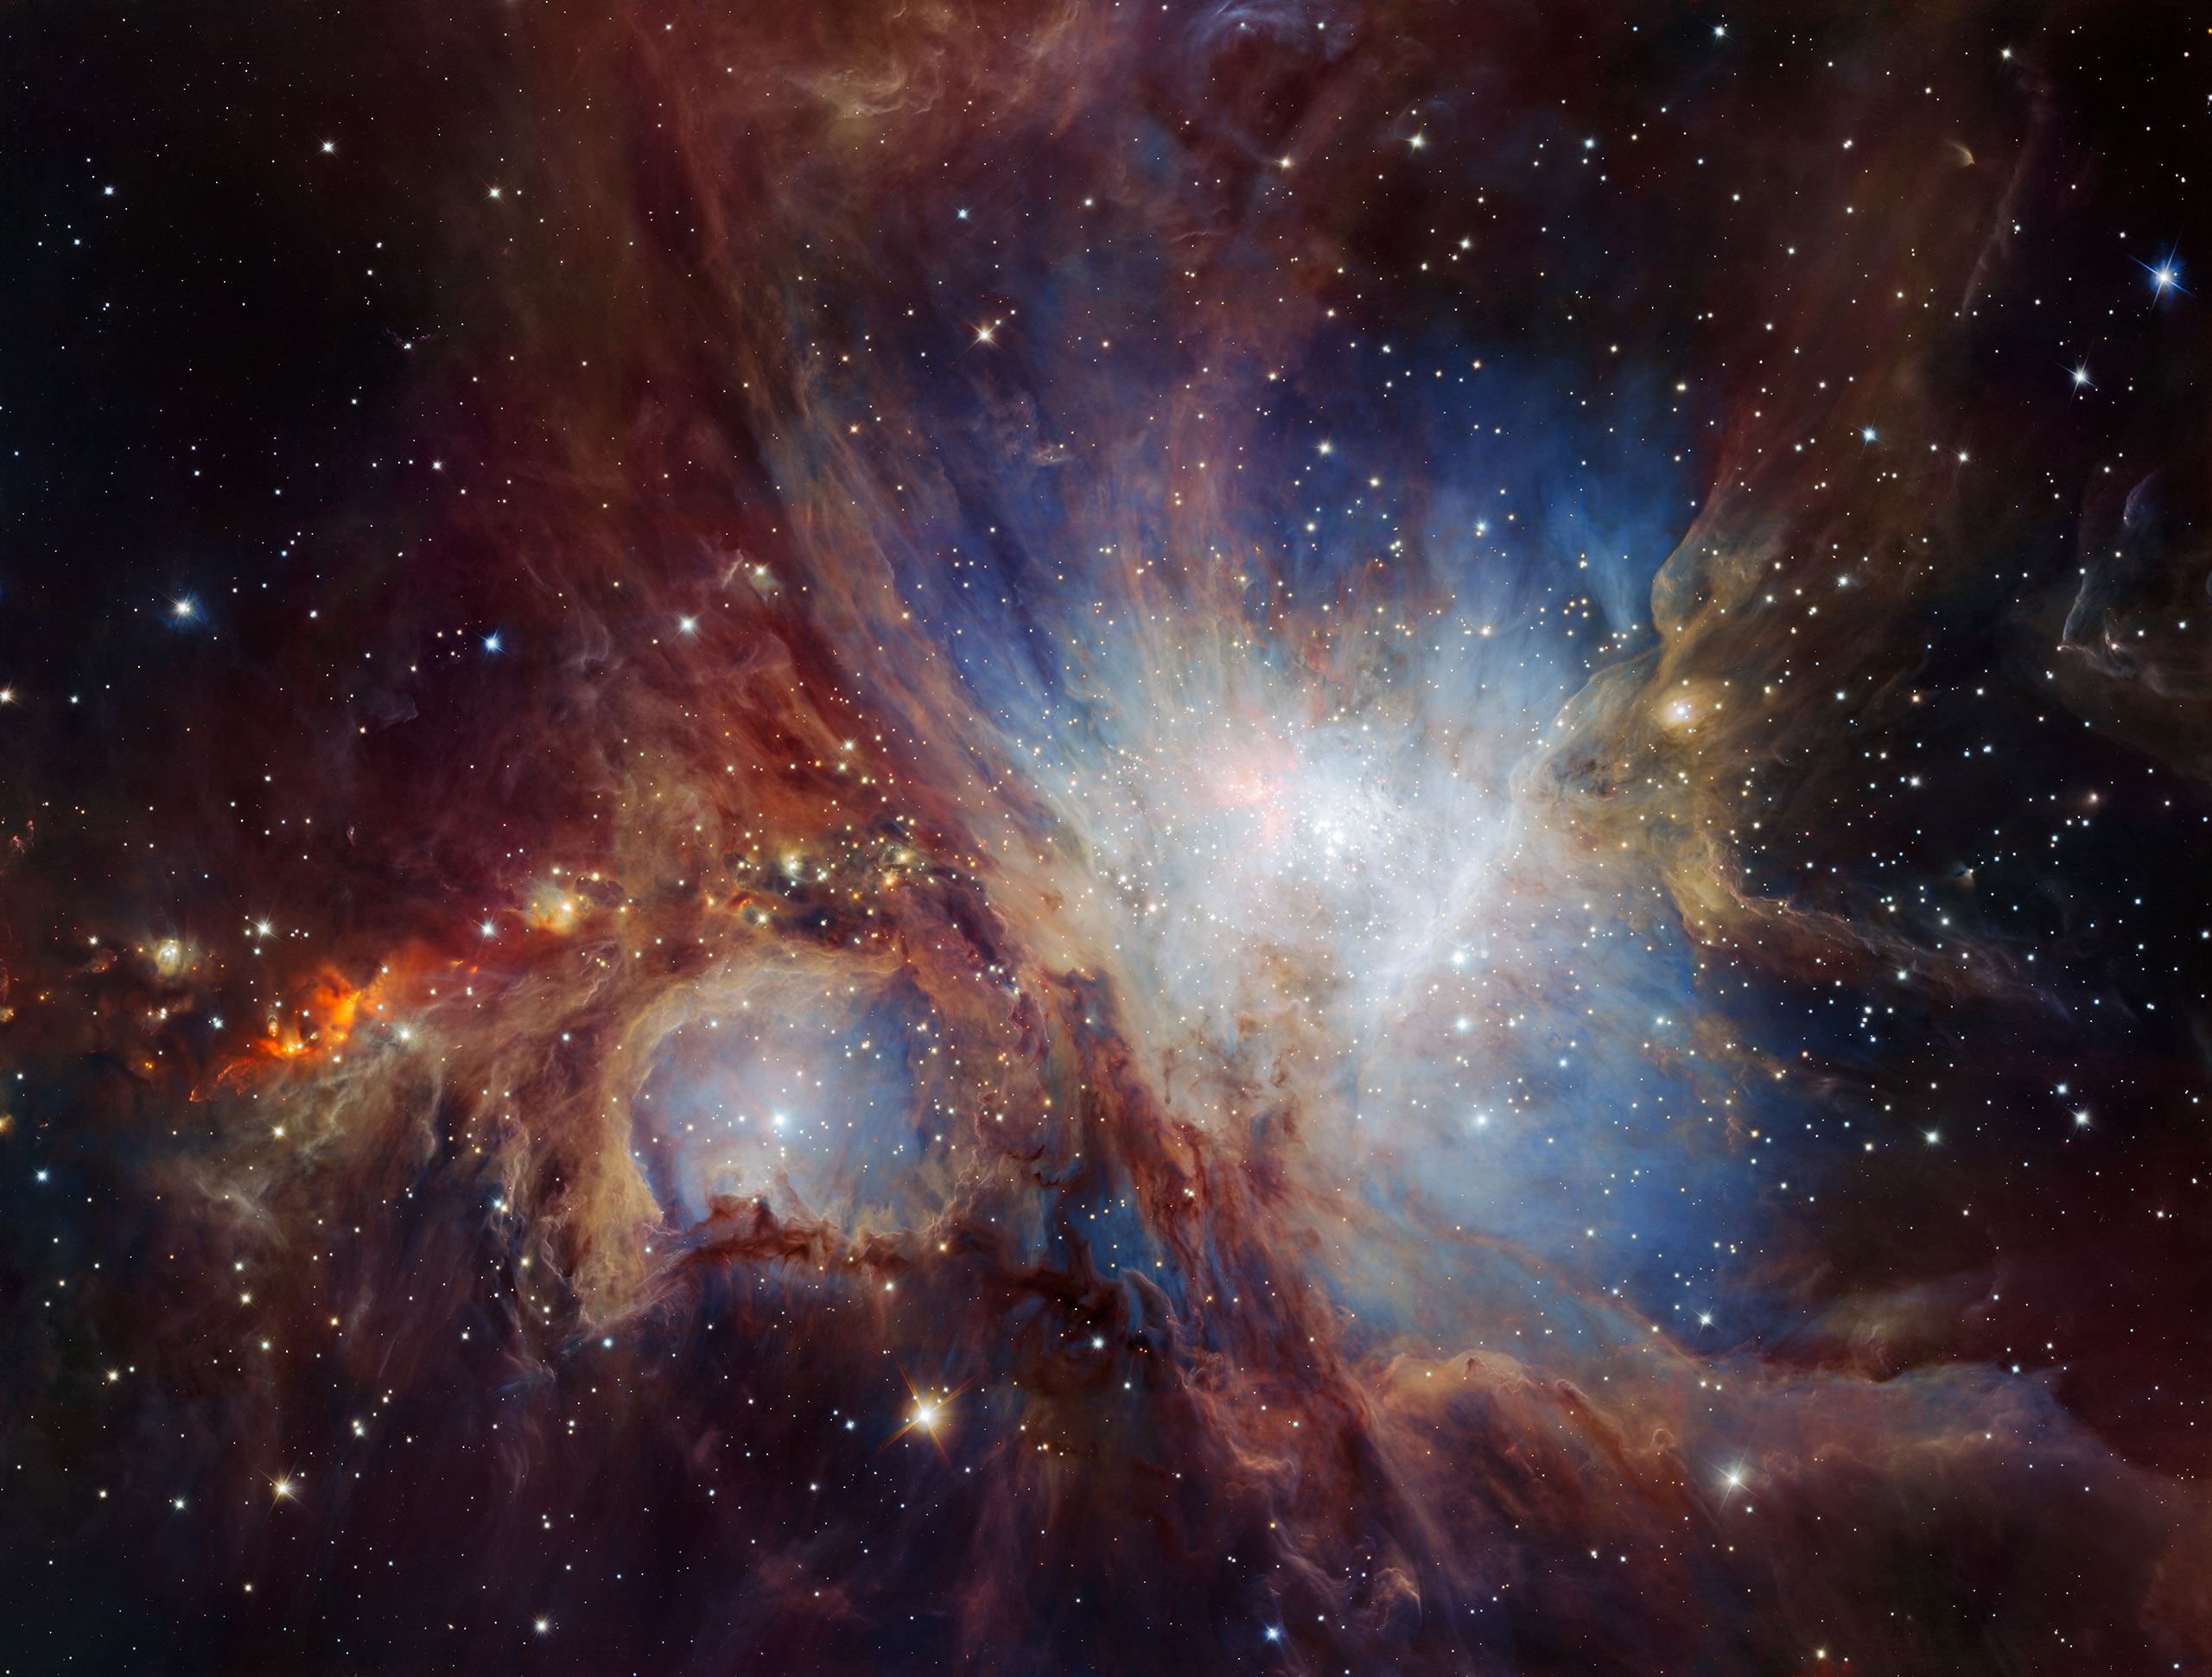 This image of the Orion Nebula star-formation region was obtained from multiple exposures using the HAWK-I infrared camera on ESO’s Very Large Telescope in Chile.